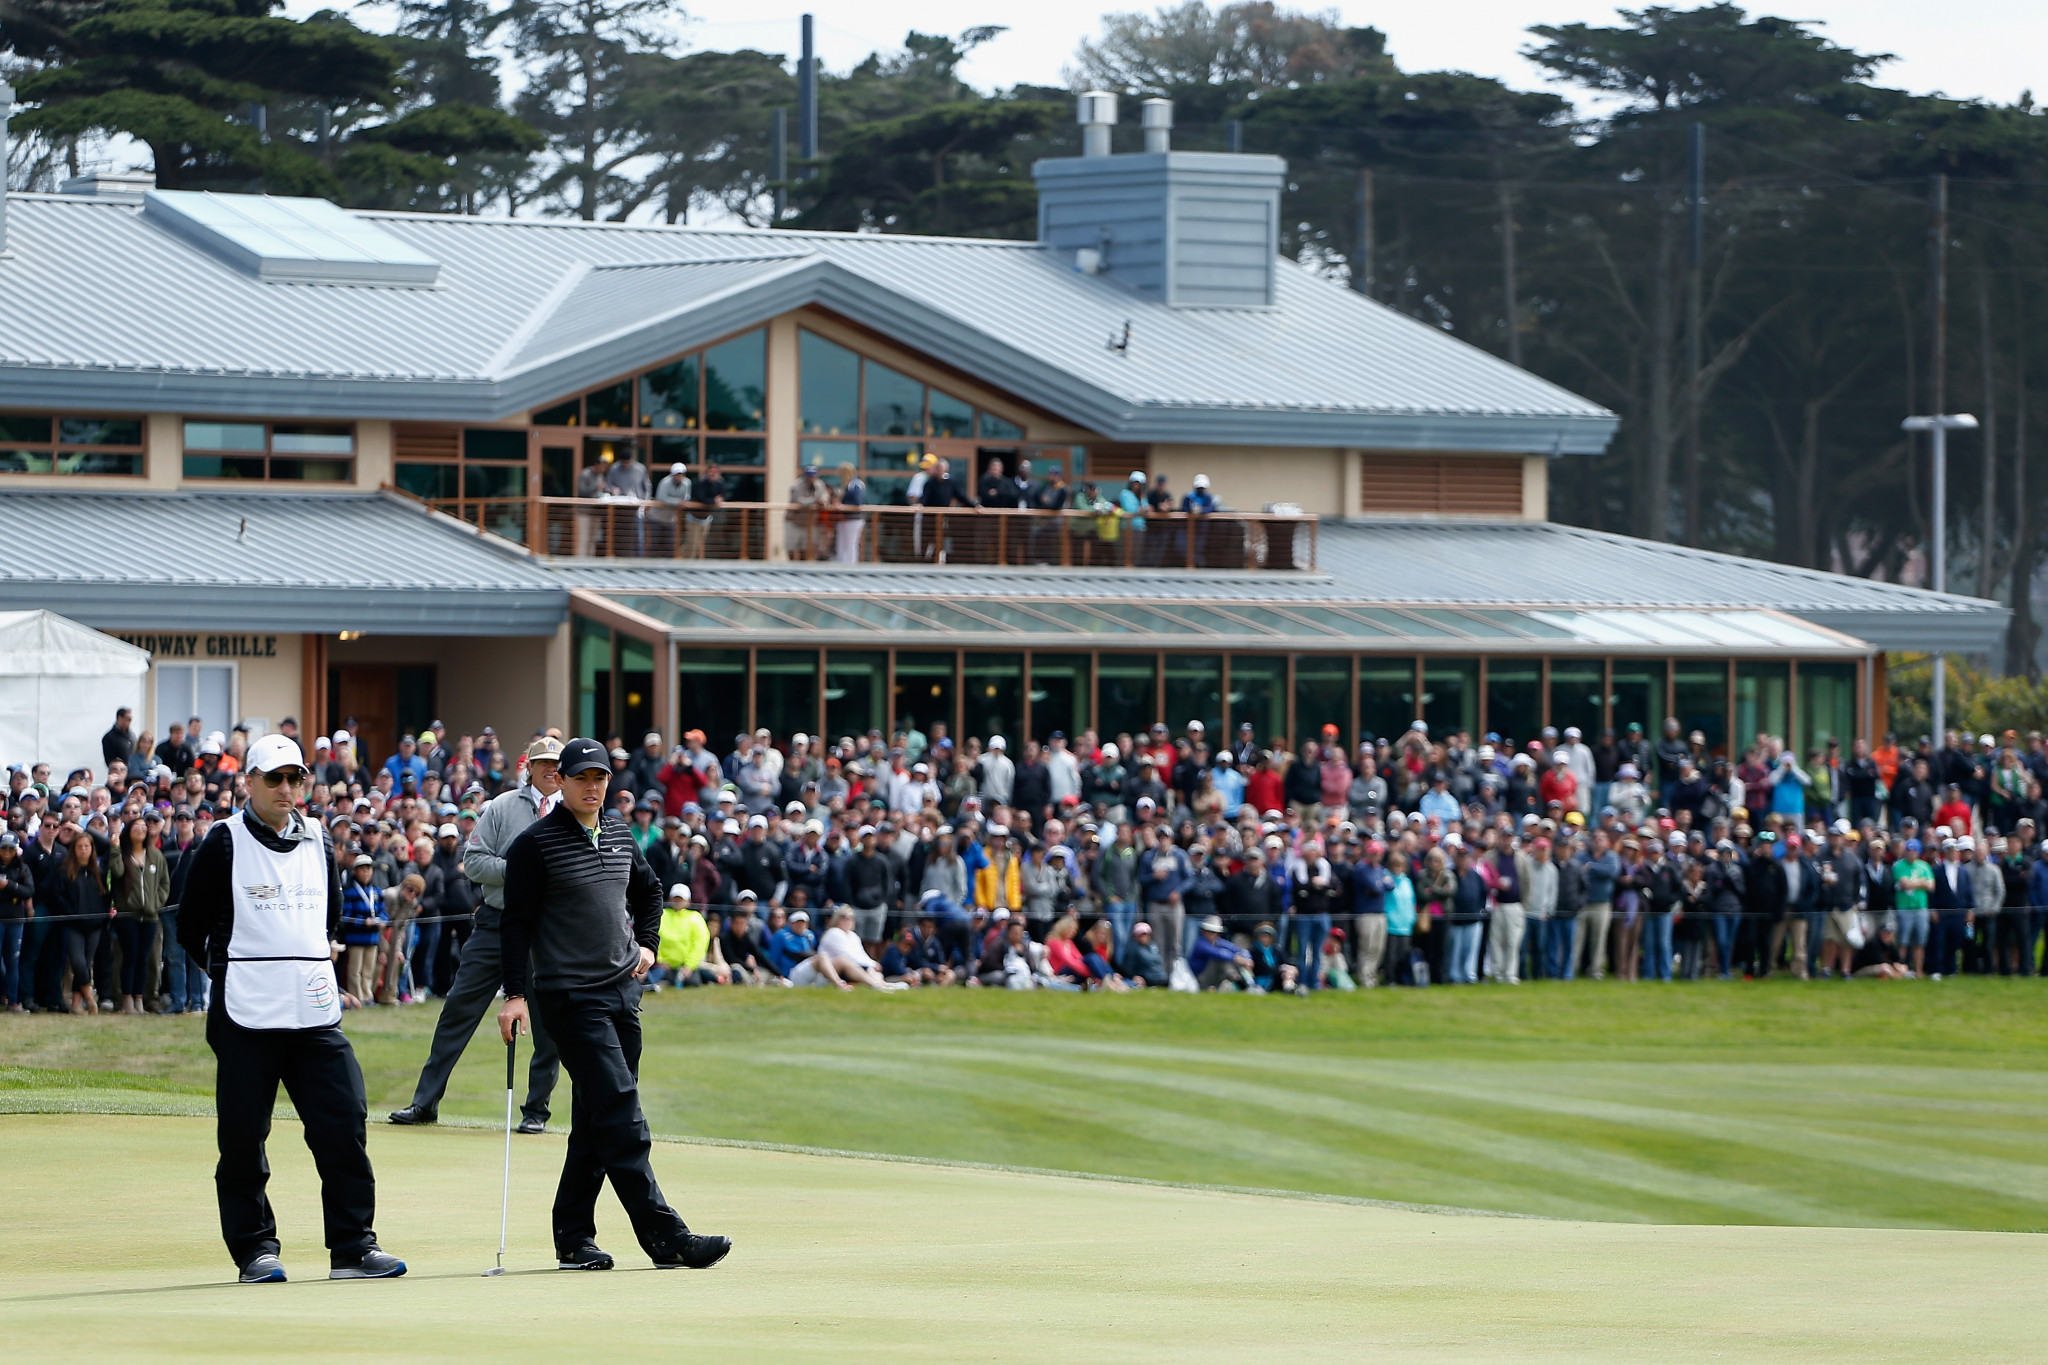 PGA Championship organisers admit event could take place without spectators